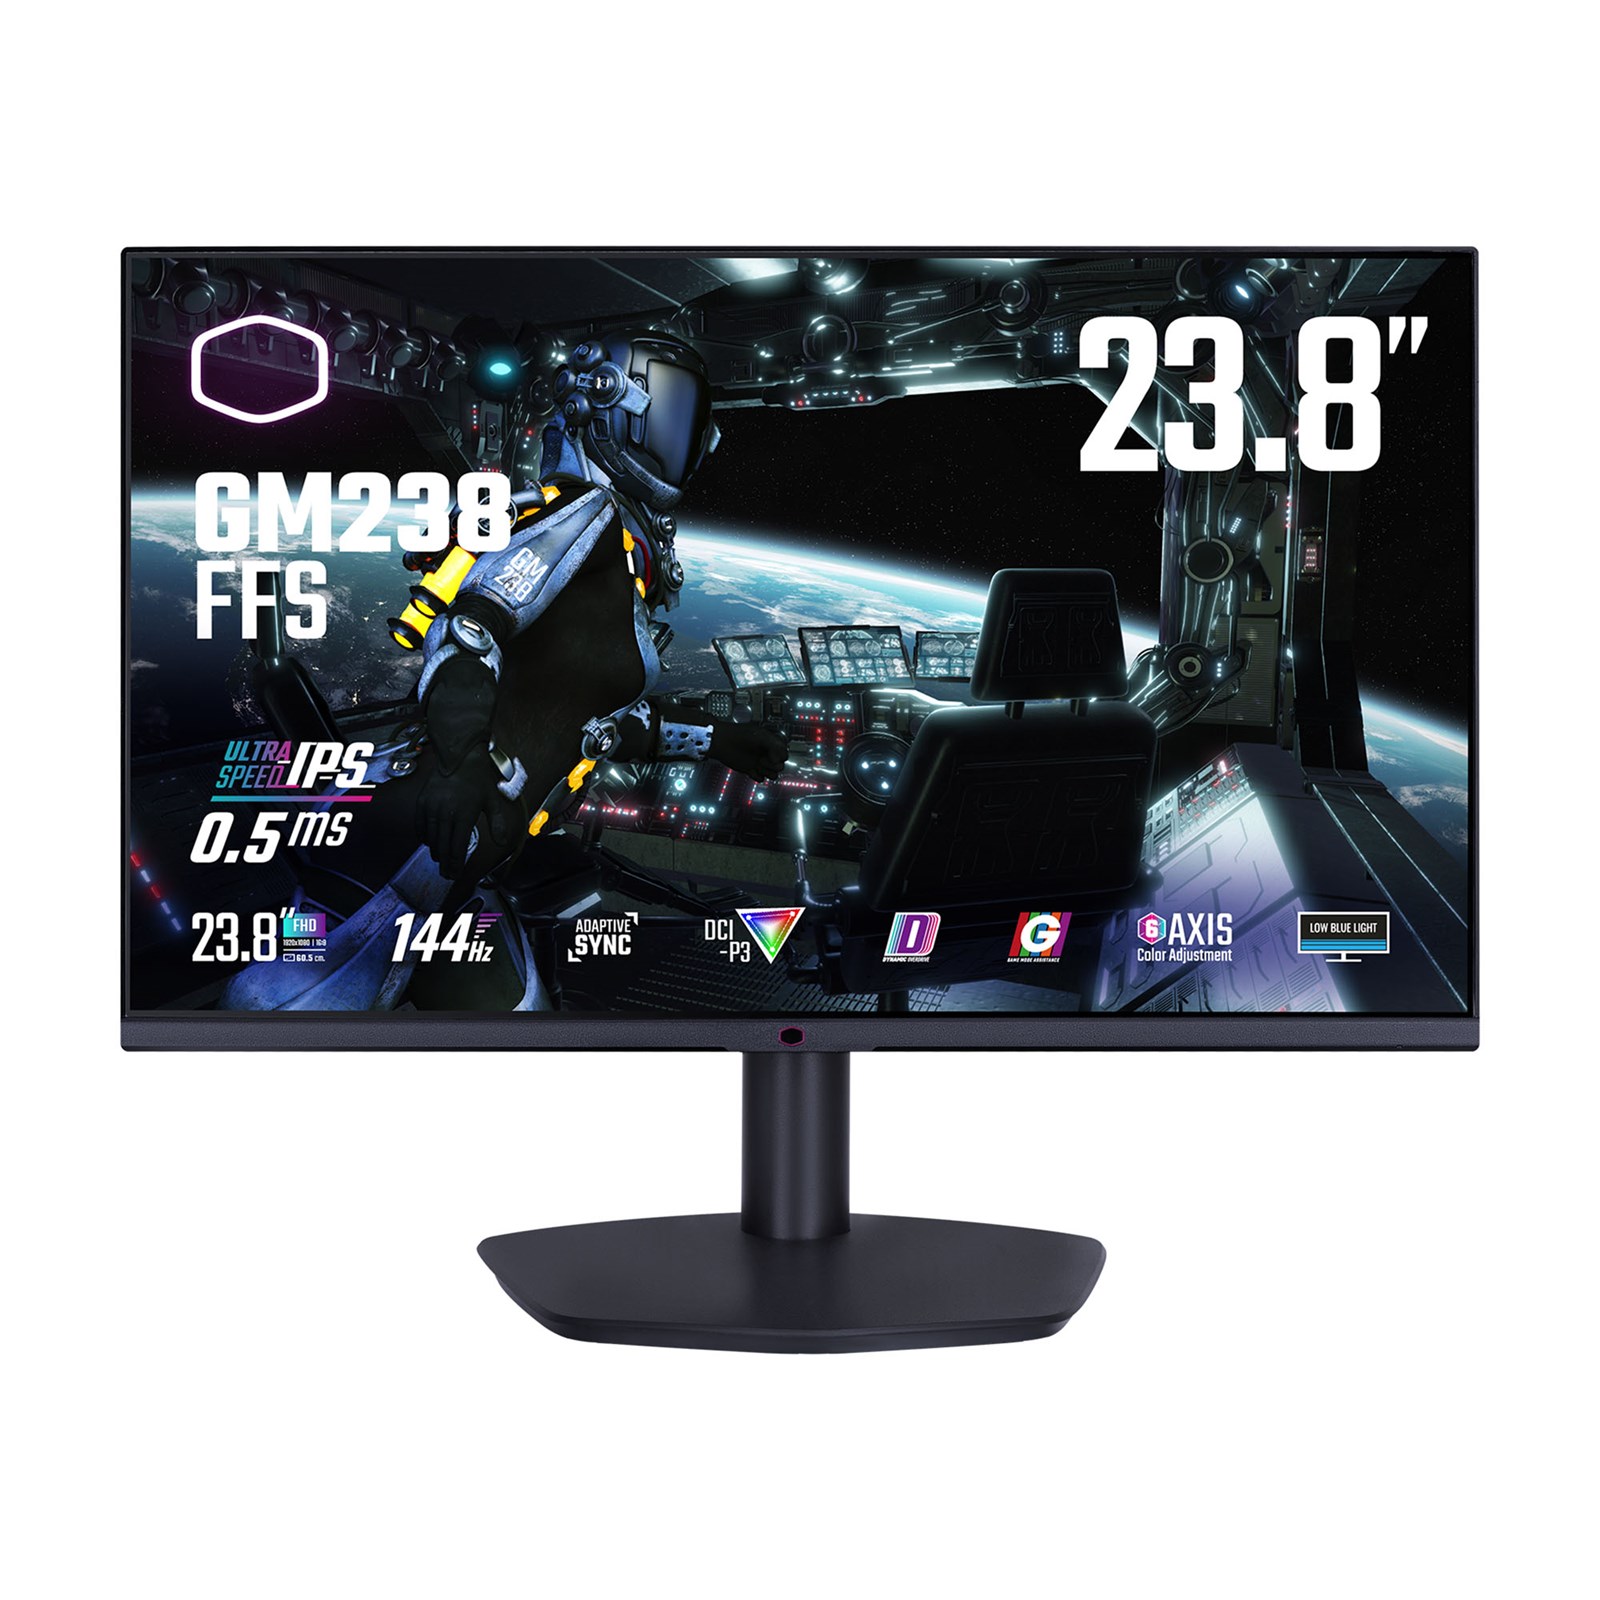 Cooler Master GM238-FFS 24 inch IPS Gaming Monitor - Full HD 1080p, 0.5ms, HDMI